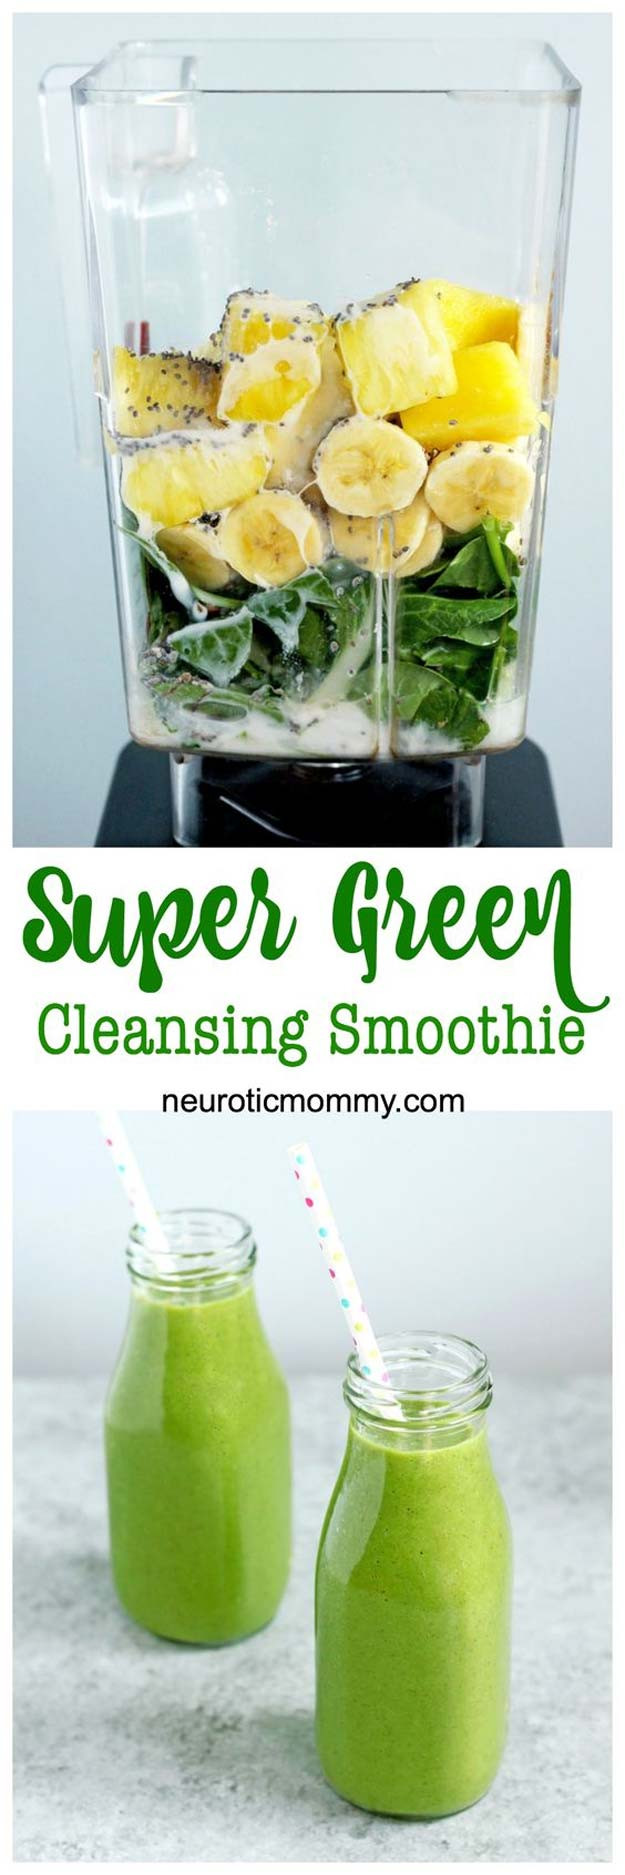 Super Healthy Smoothie Recipes
 33 Healthy Smoothie Recipes The Goddess